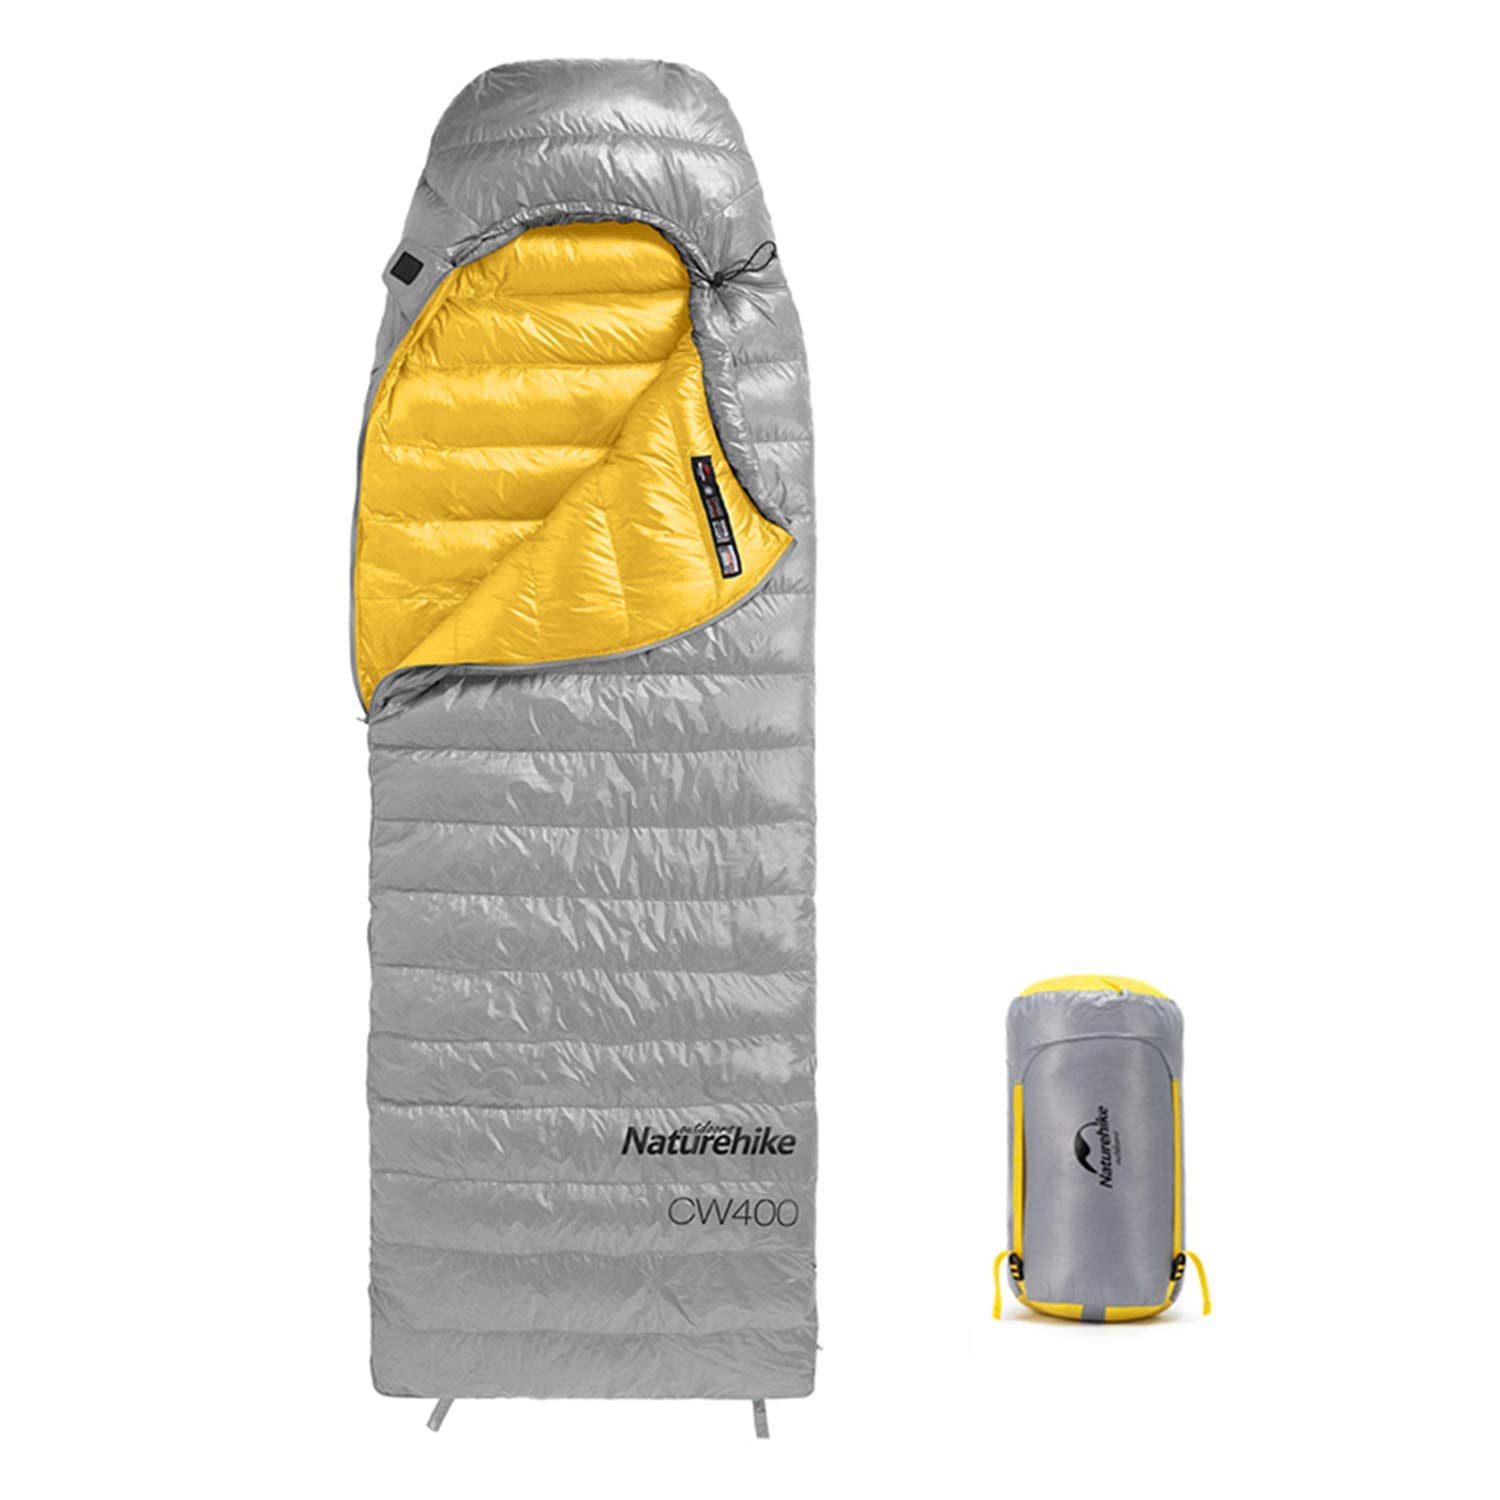 Naturehike Lightweight Down Sleeping Bags for Adults 750 Fill Power 4 Season,2.0lbs Ultralight Compact Portable,Waterproof, Camping, Hiking, Backpacking With Compression Bag